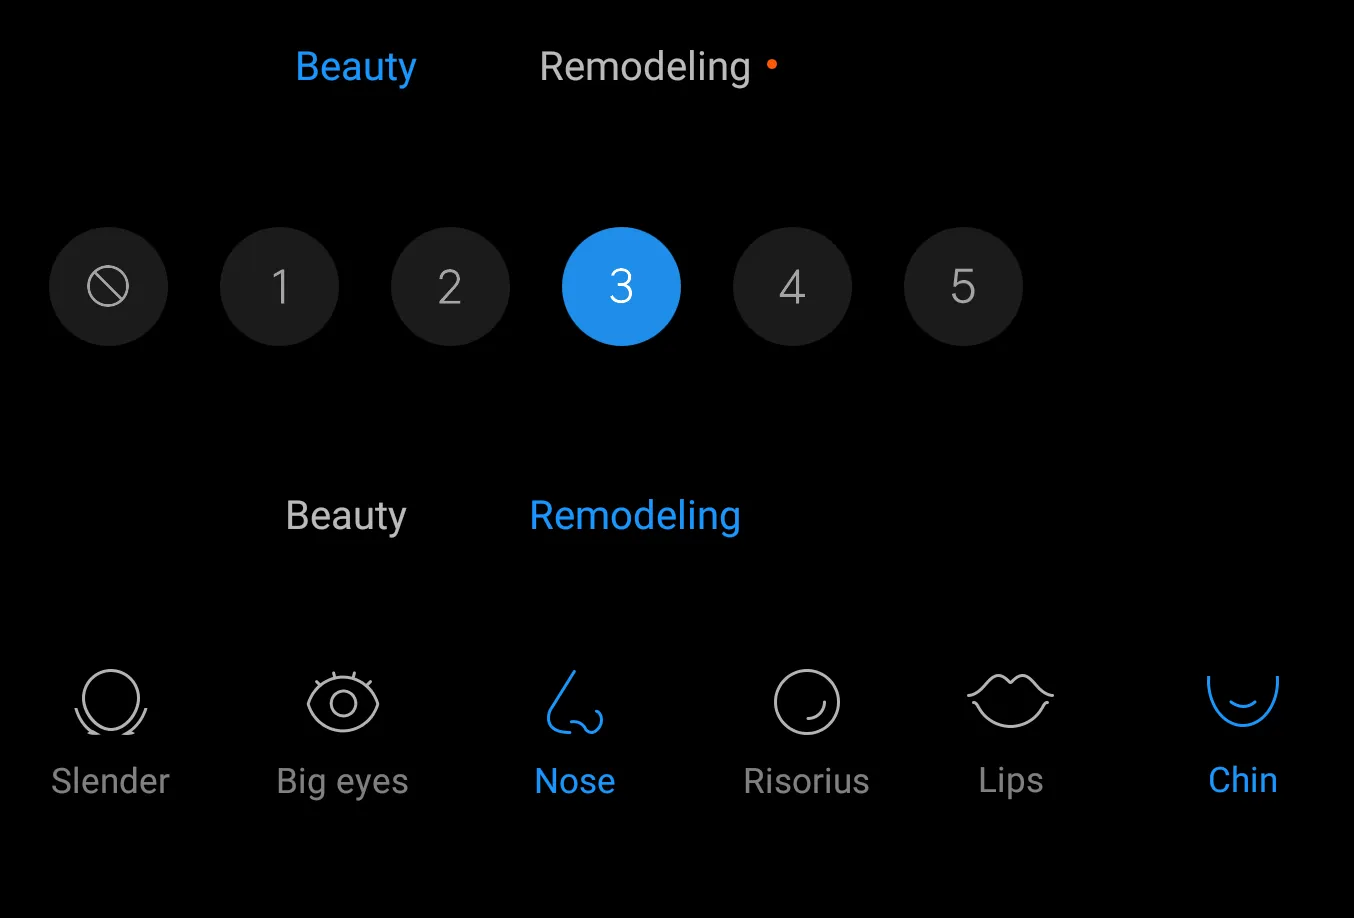 Xiaomi Mi 8 (Global version) Beauty face and remodelling options